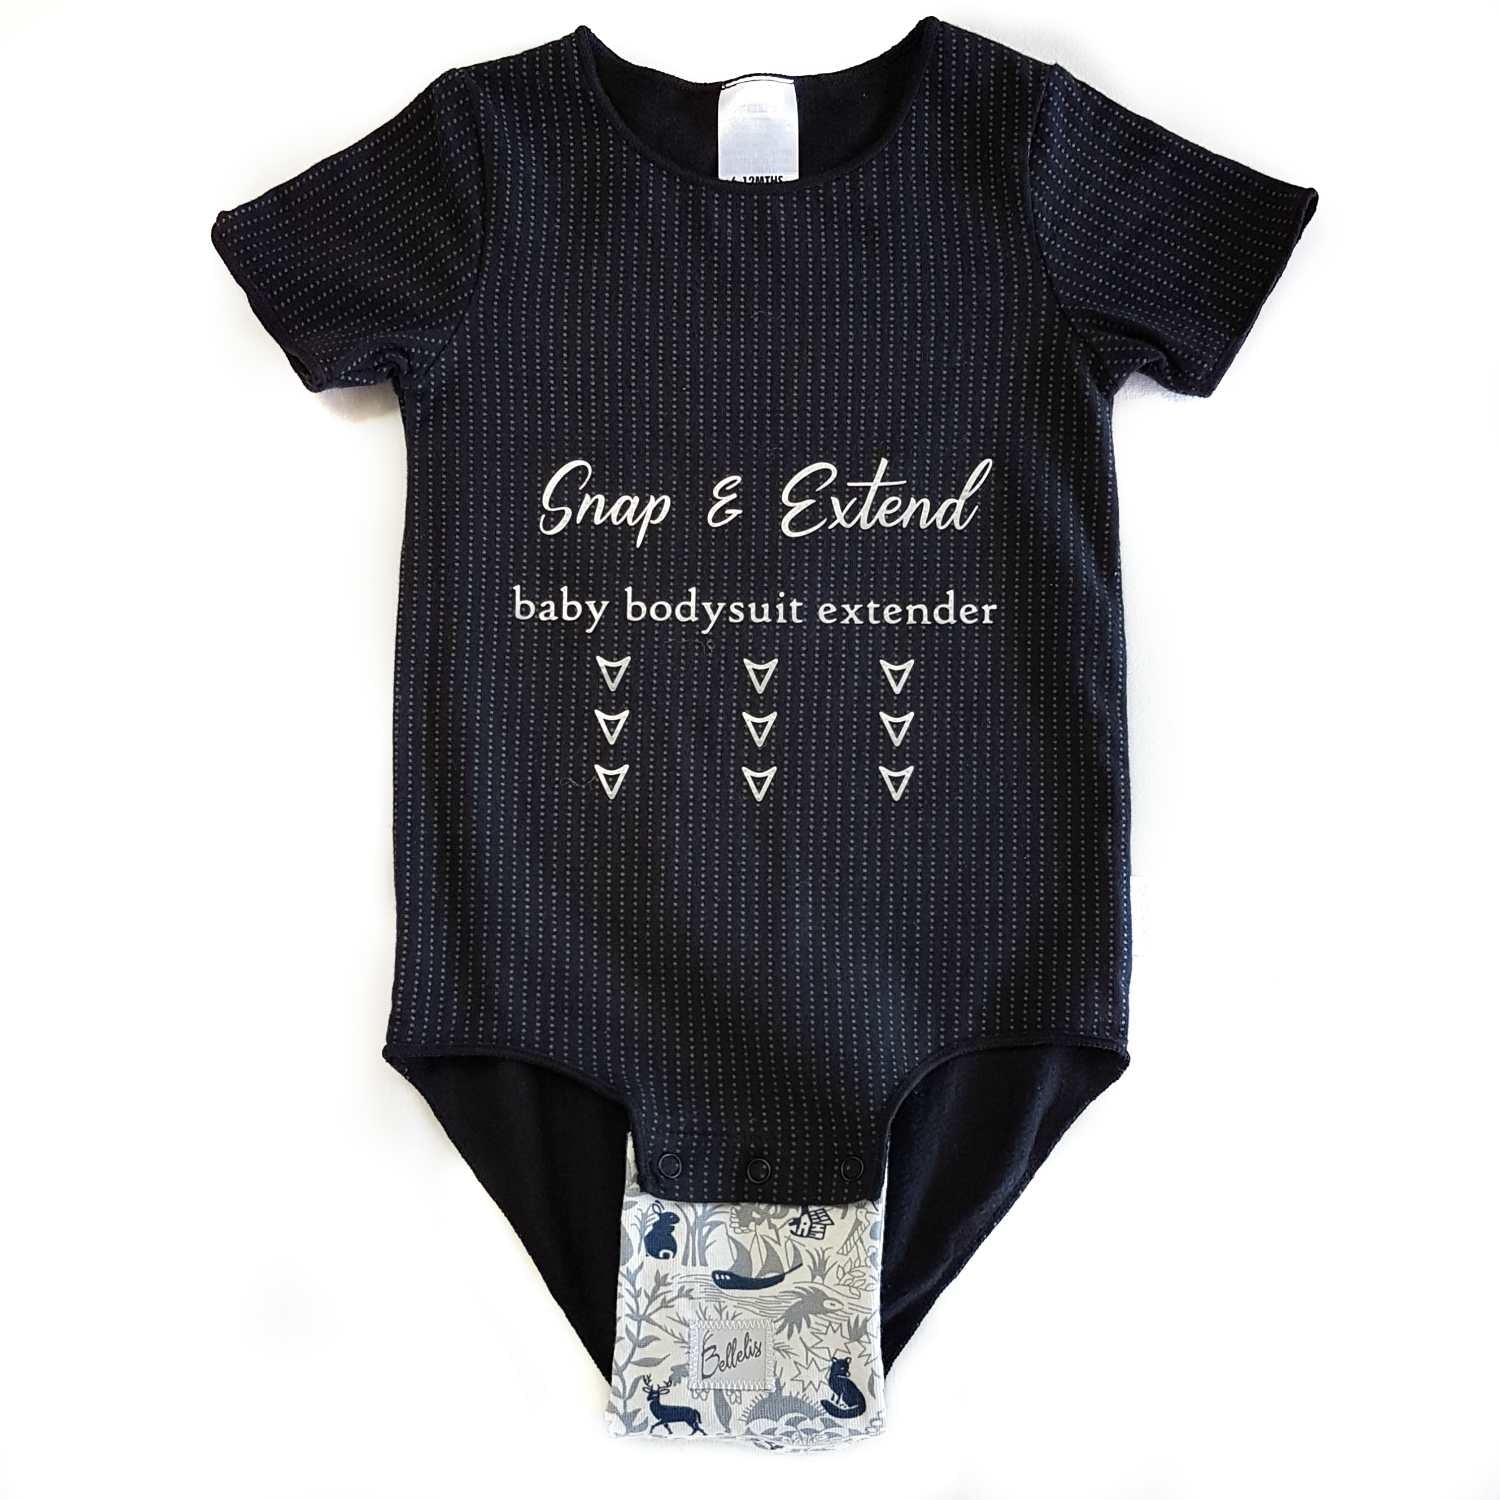 baby bodysuit extender is a must for new parents. get yours now